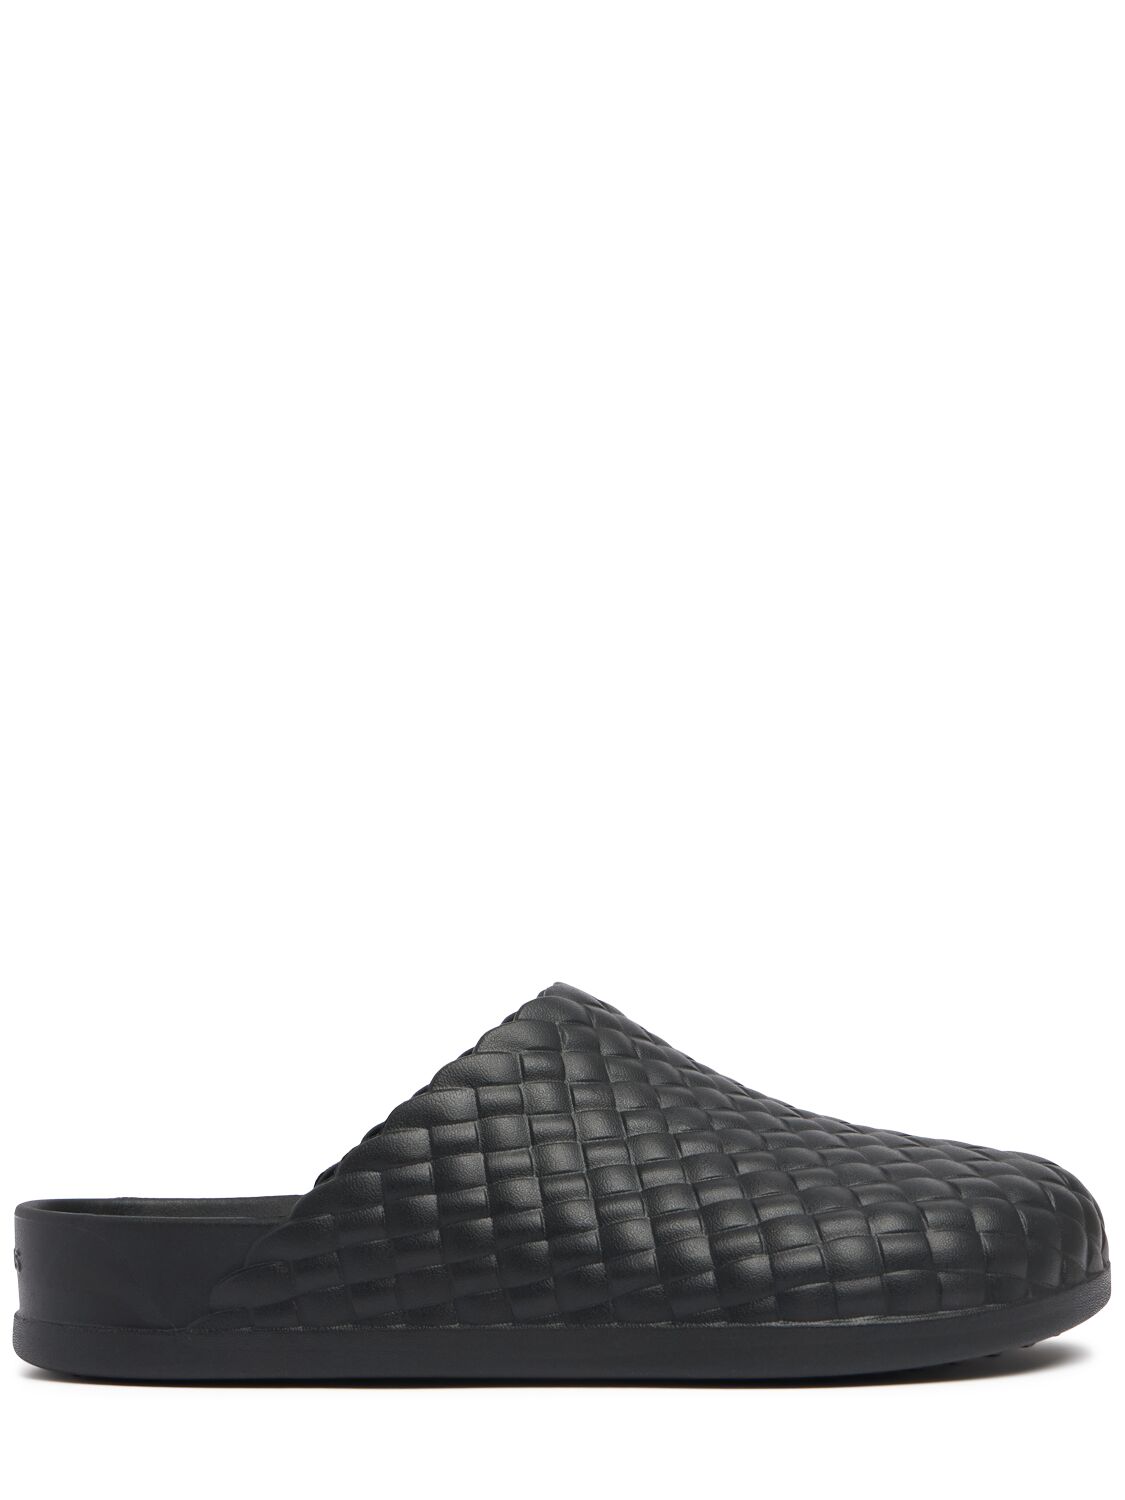 Crocs Dylan Woven Rubber Clogs In Black